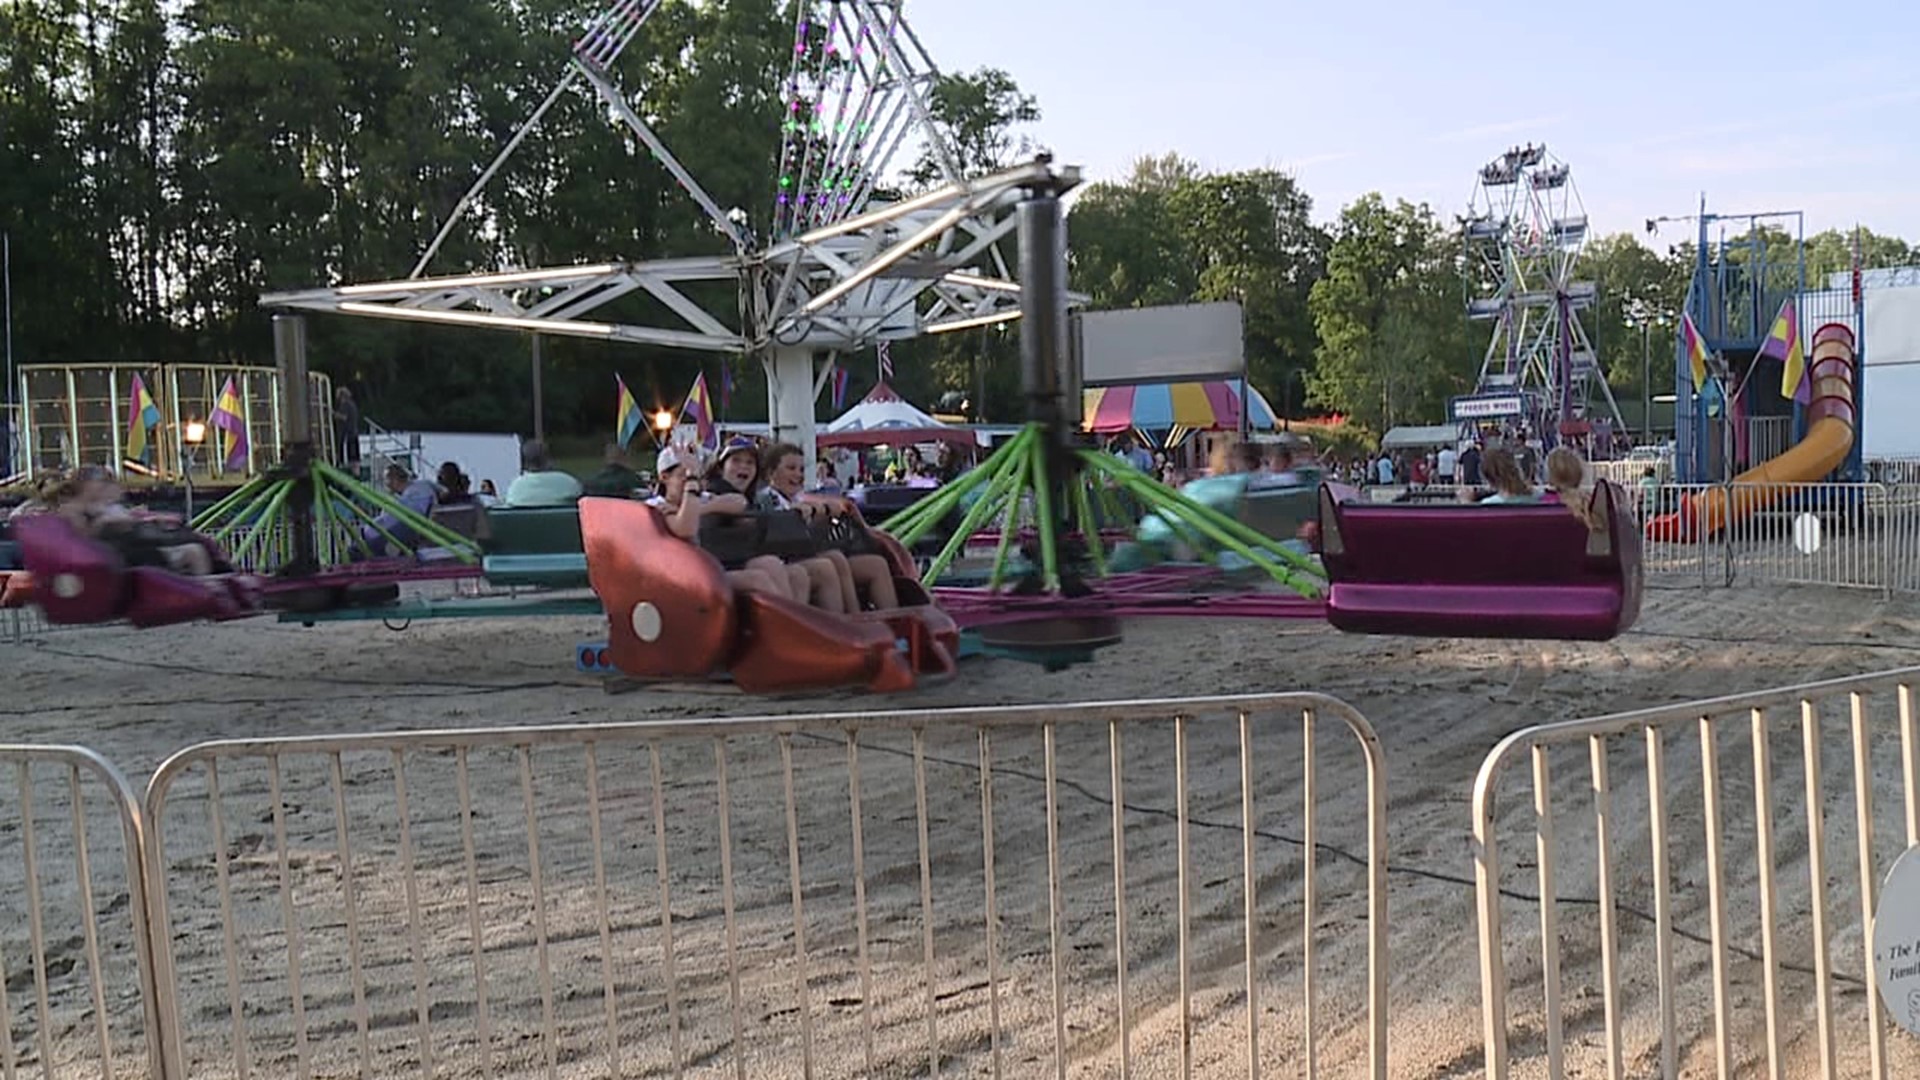 The carnival kicked off Tuesday night and runs through Saturday in Lackawanna County.